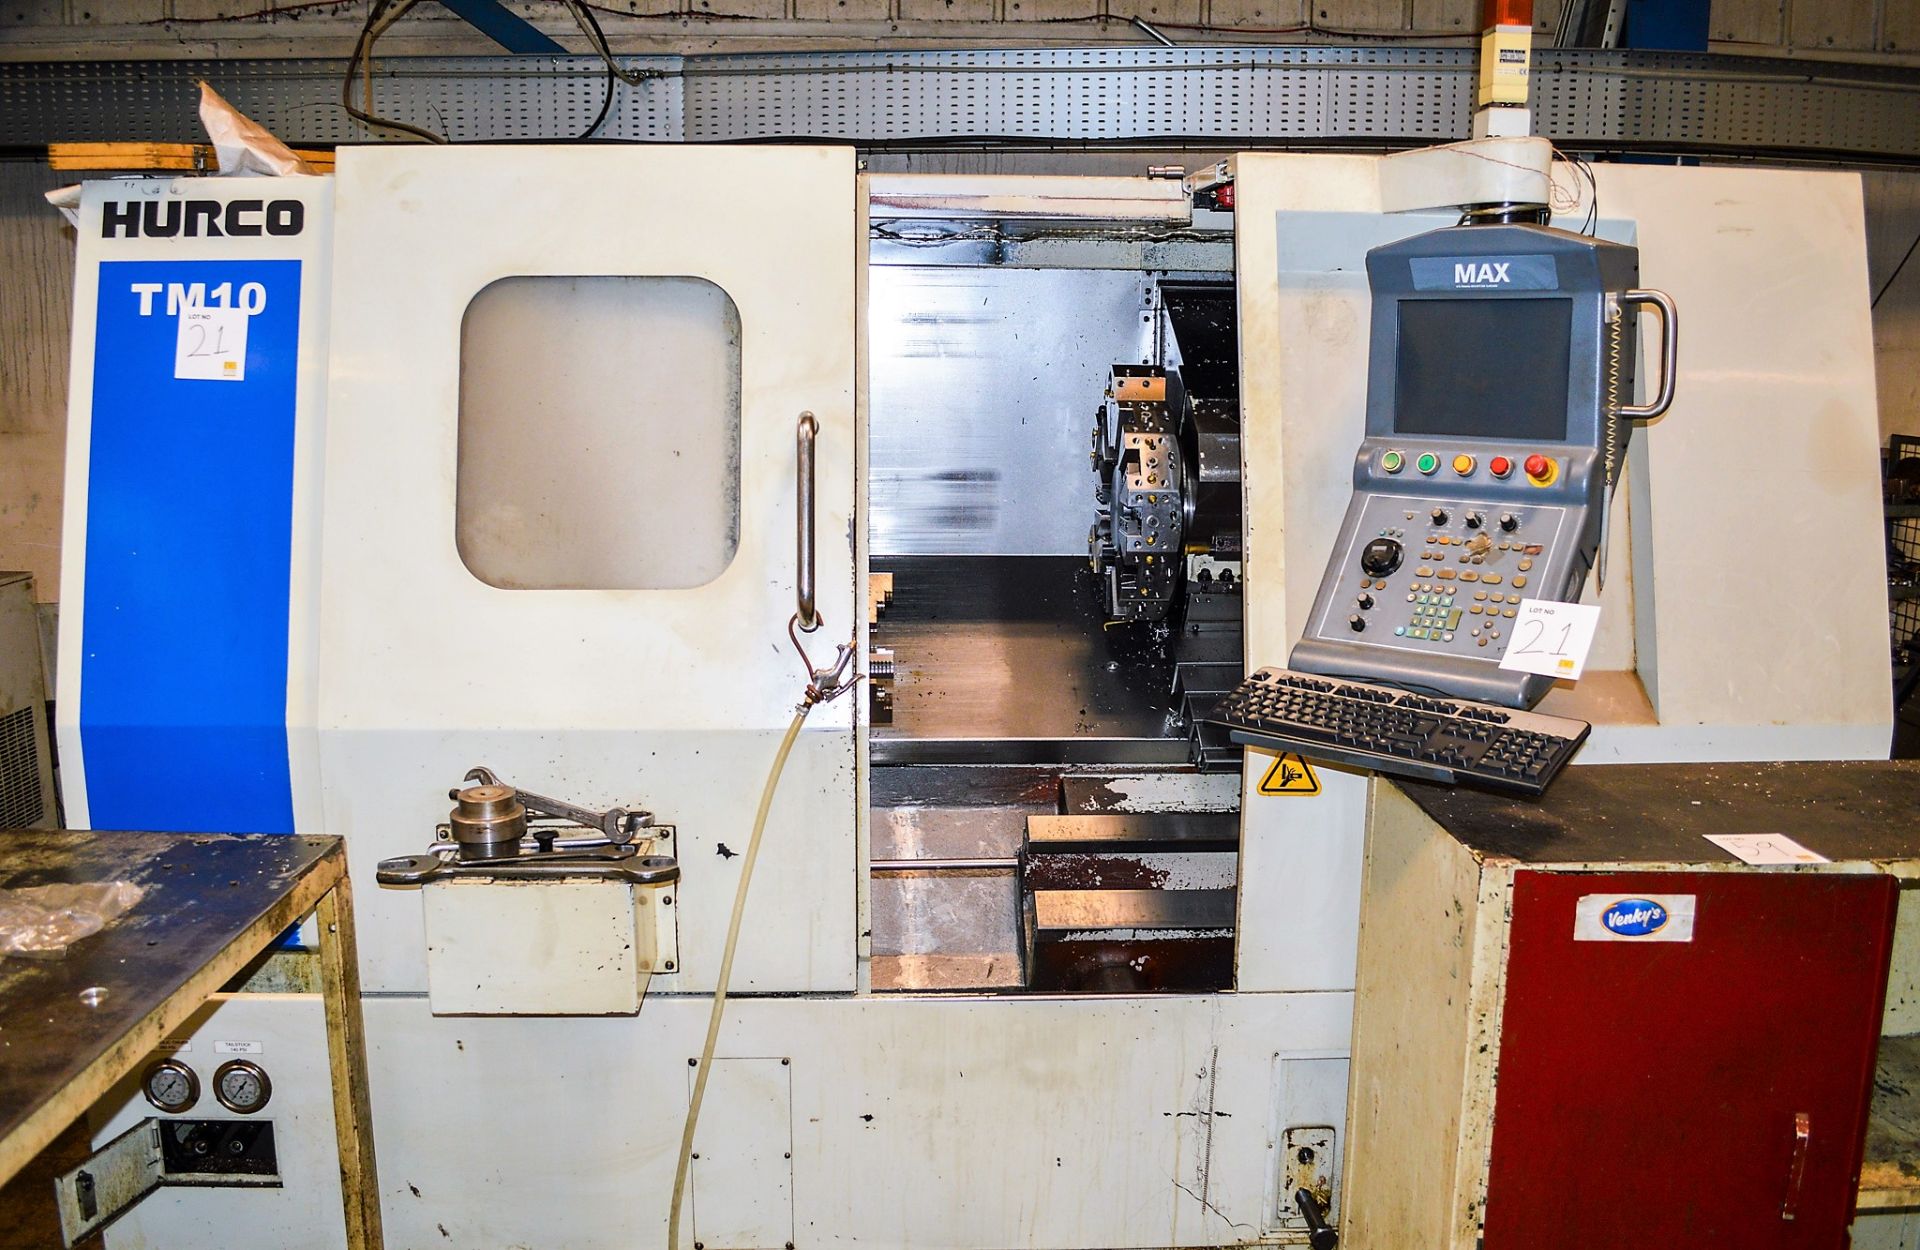 Hurco TMM10 CNC slant bed lathe S/N: 01103045AAA c/w 12 station tool store, headstock, Hurlo Max - Image 2 of 6